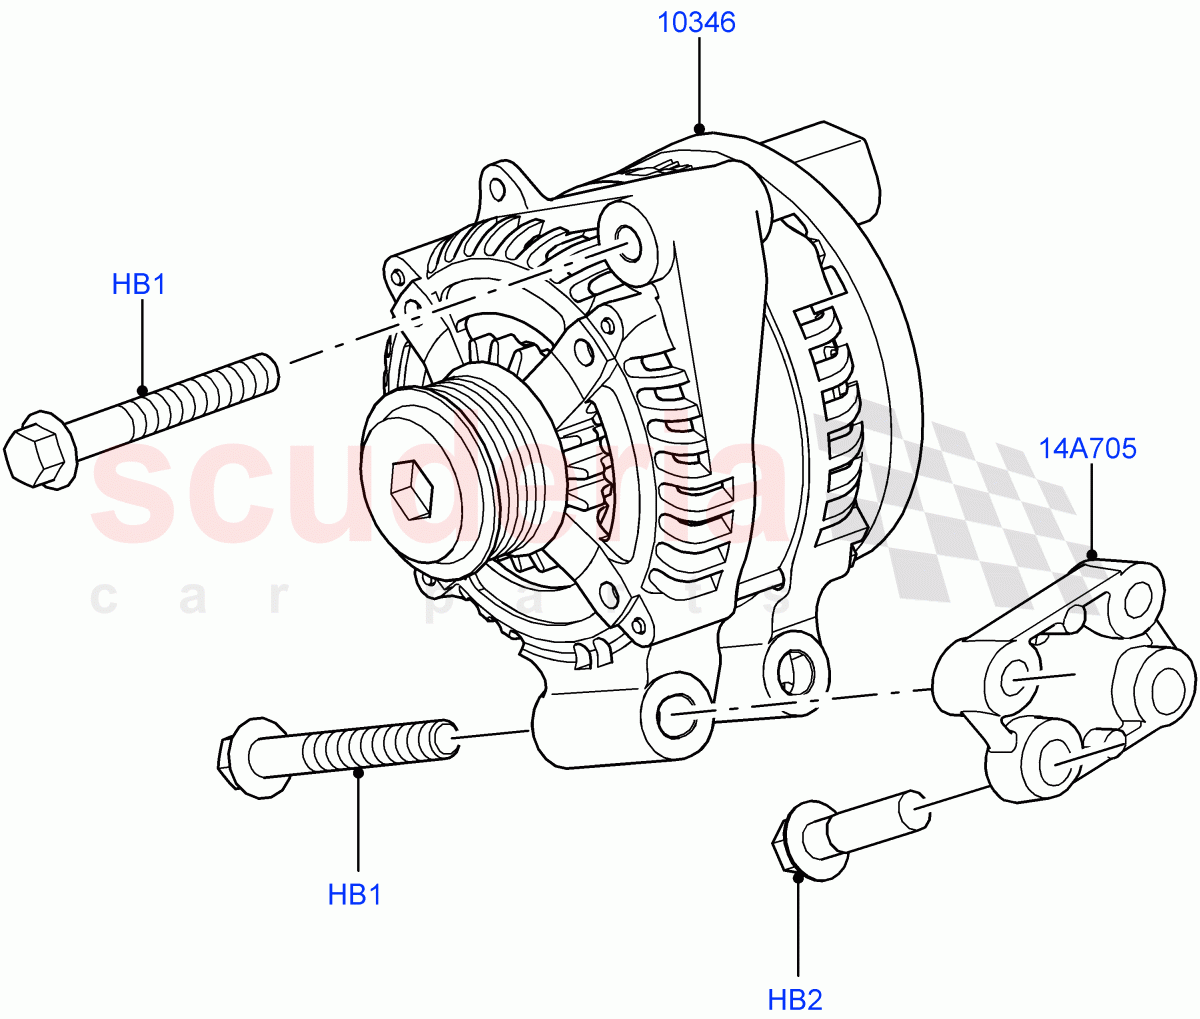 Alternator And Mountings(Solihull Plant Build)(3.0L DOHC GDI SC V6 PETROL)((V)FROMHA000001) of Land Rover Land Rover Discovery 5 (2017+) [2.0 Turbo Diesel]